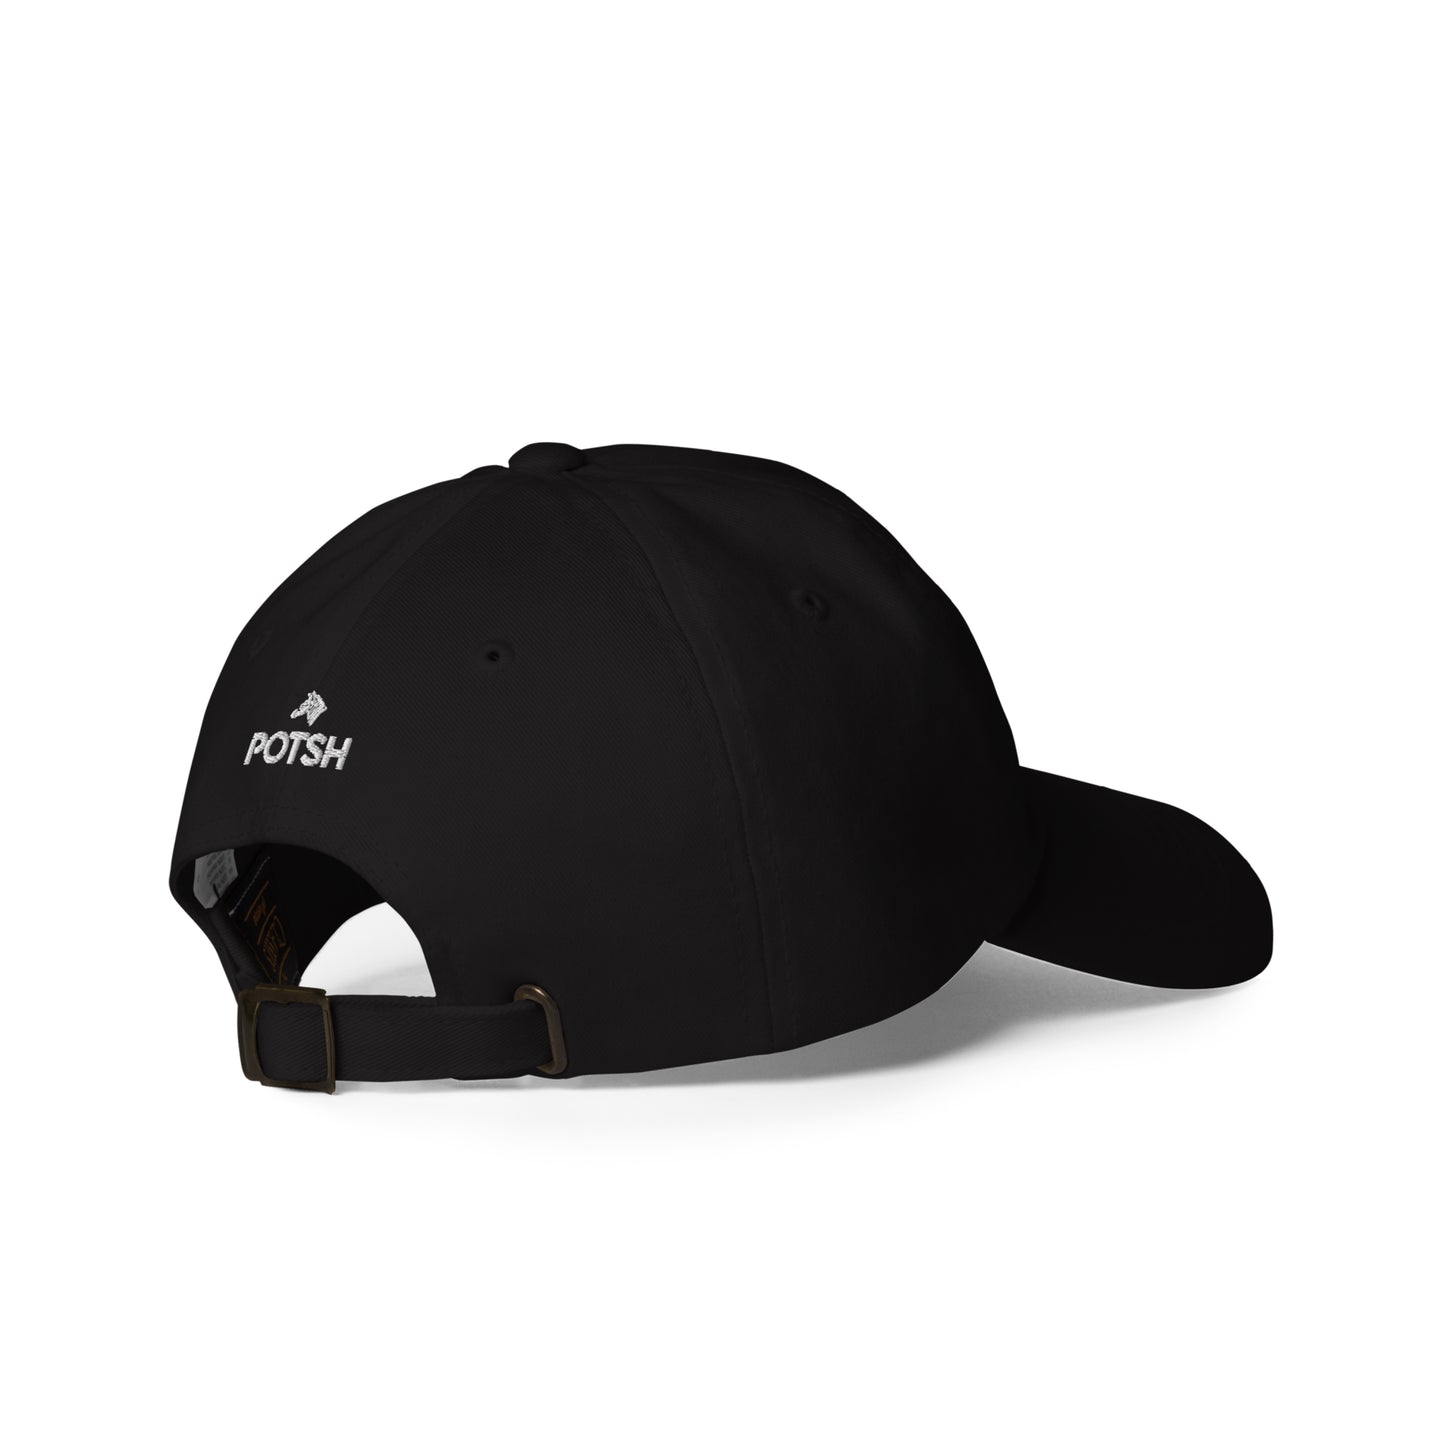 Embroidered "Saucy" Black Cap